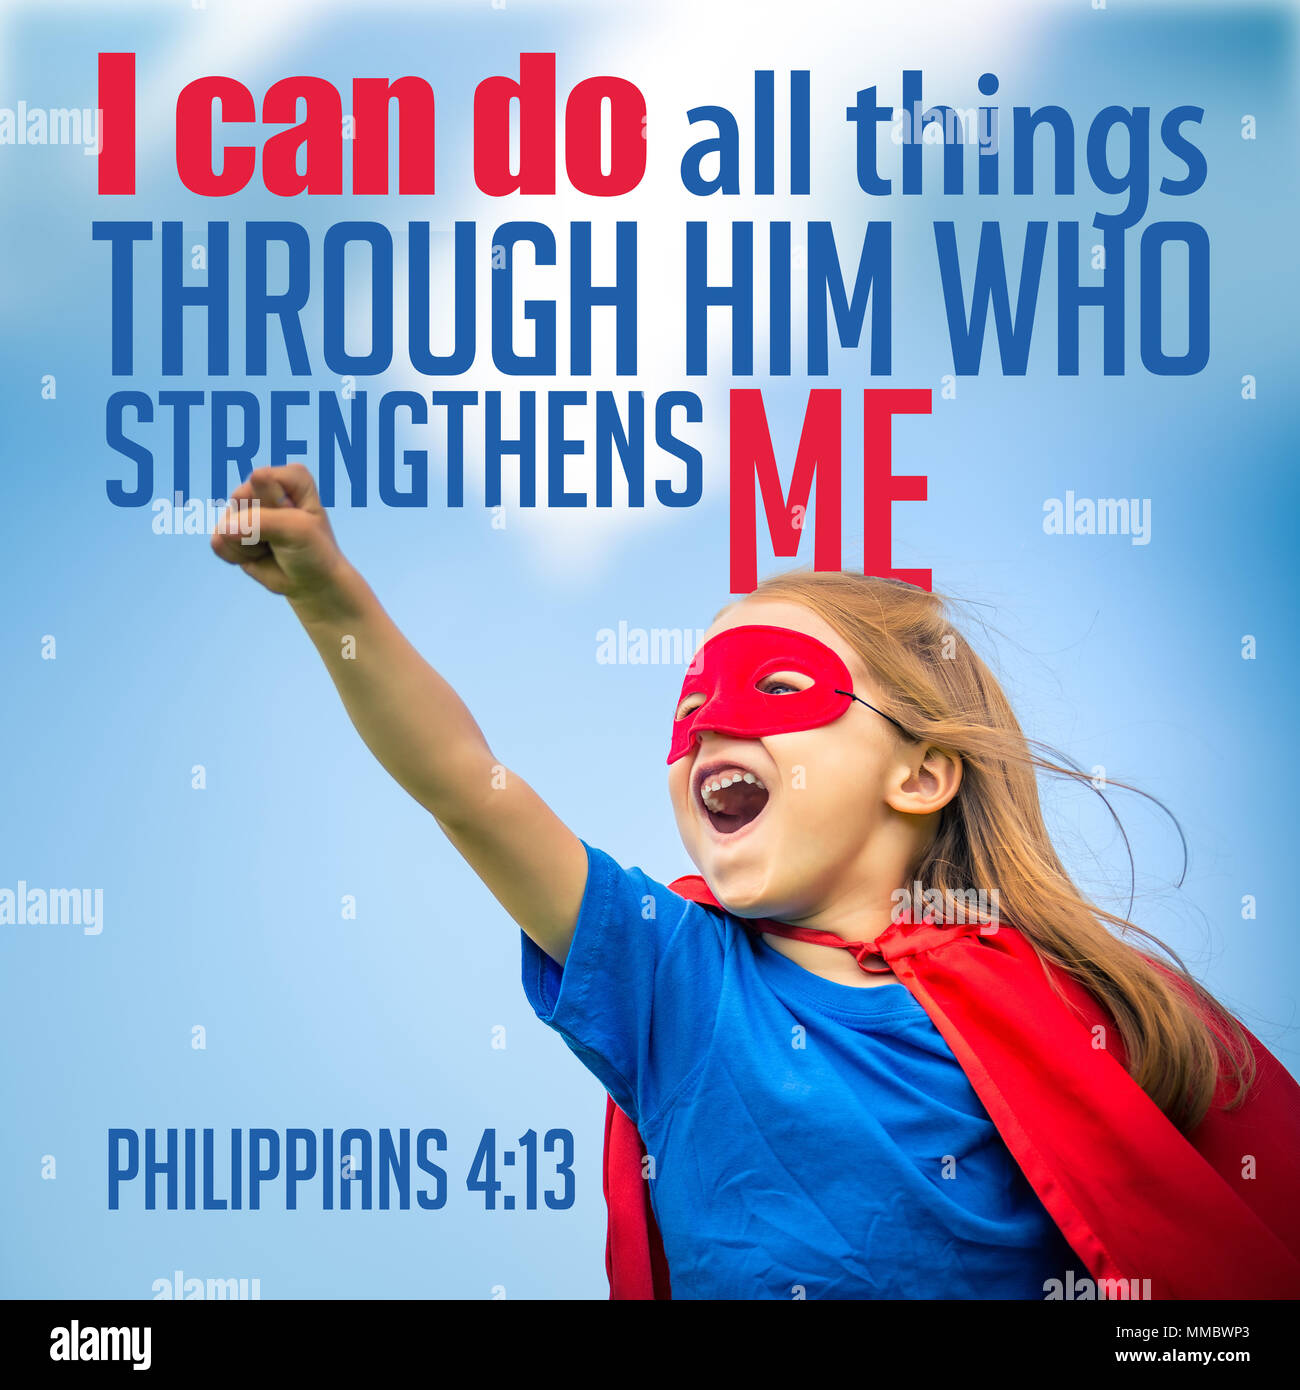 I can do all things through him who strengthens me Philippians 4:13 Stock Photo